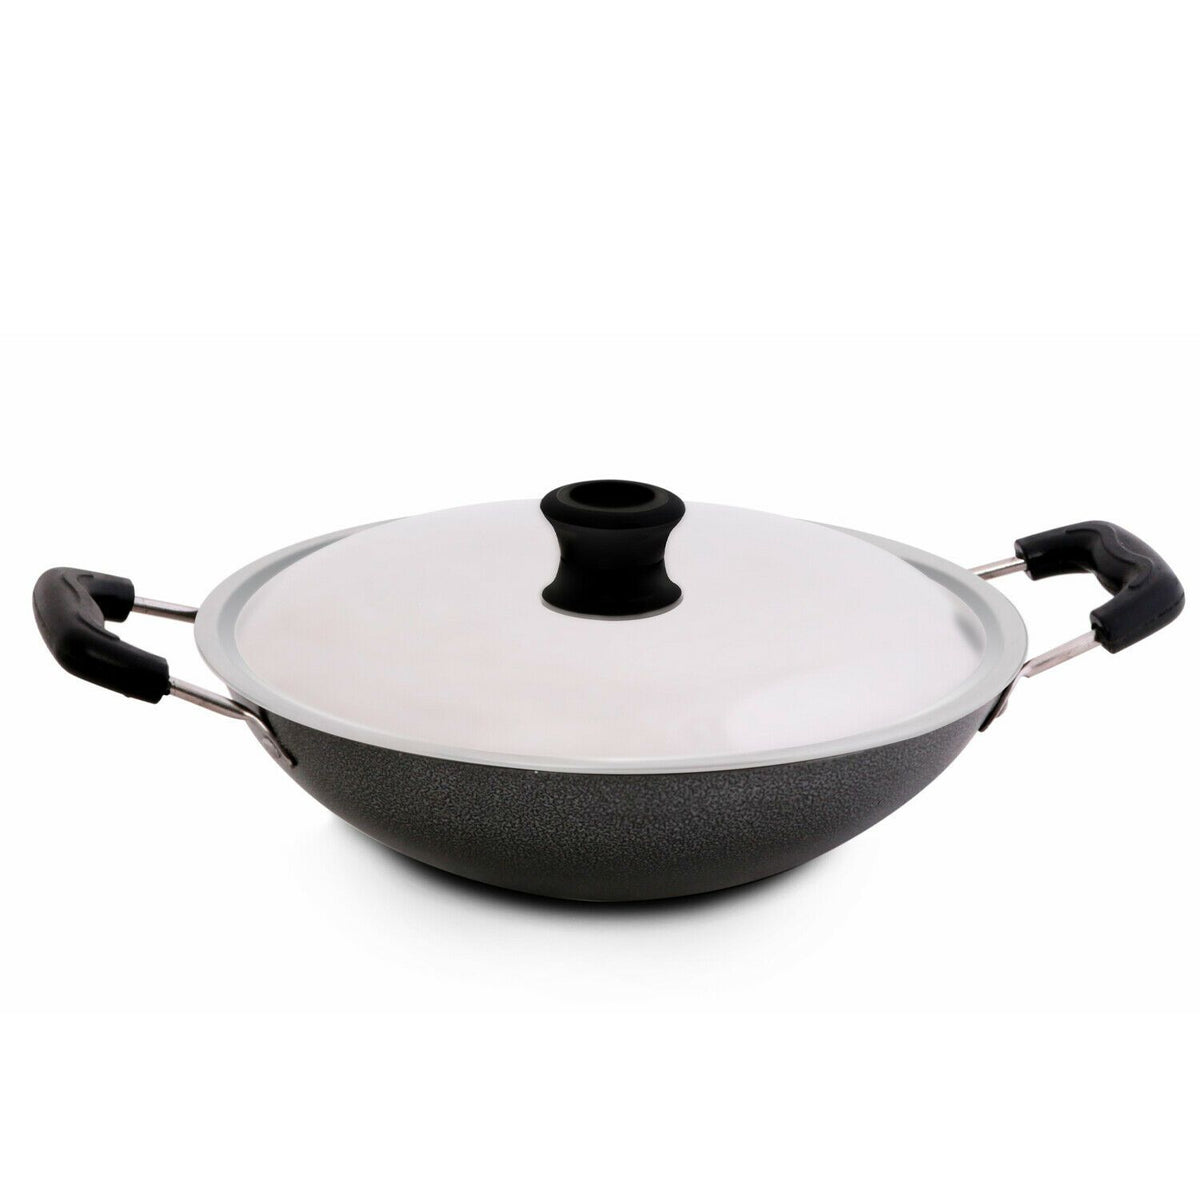 Appachatty Deep Appam Pan With Lid By Royalford Royalford 